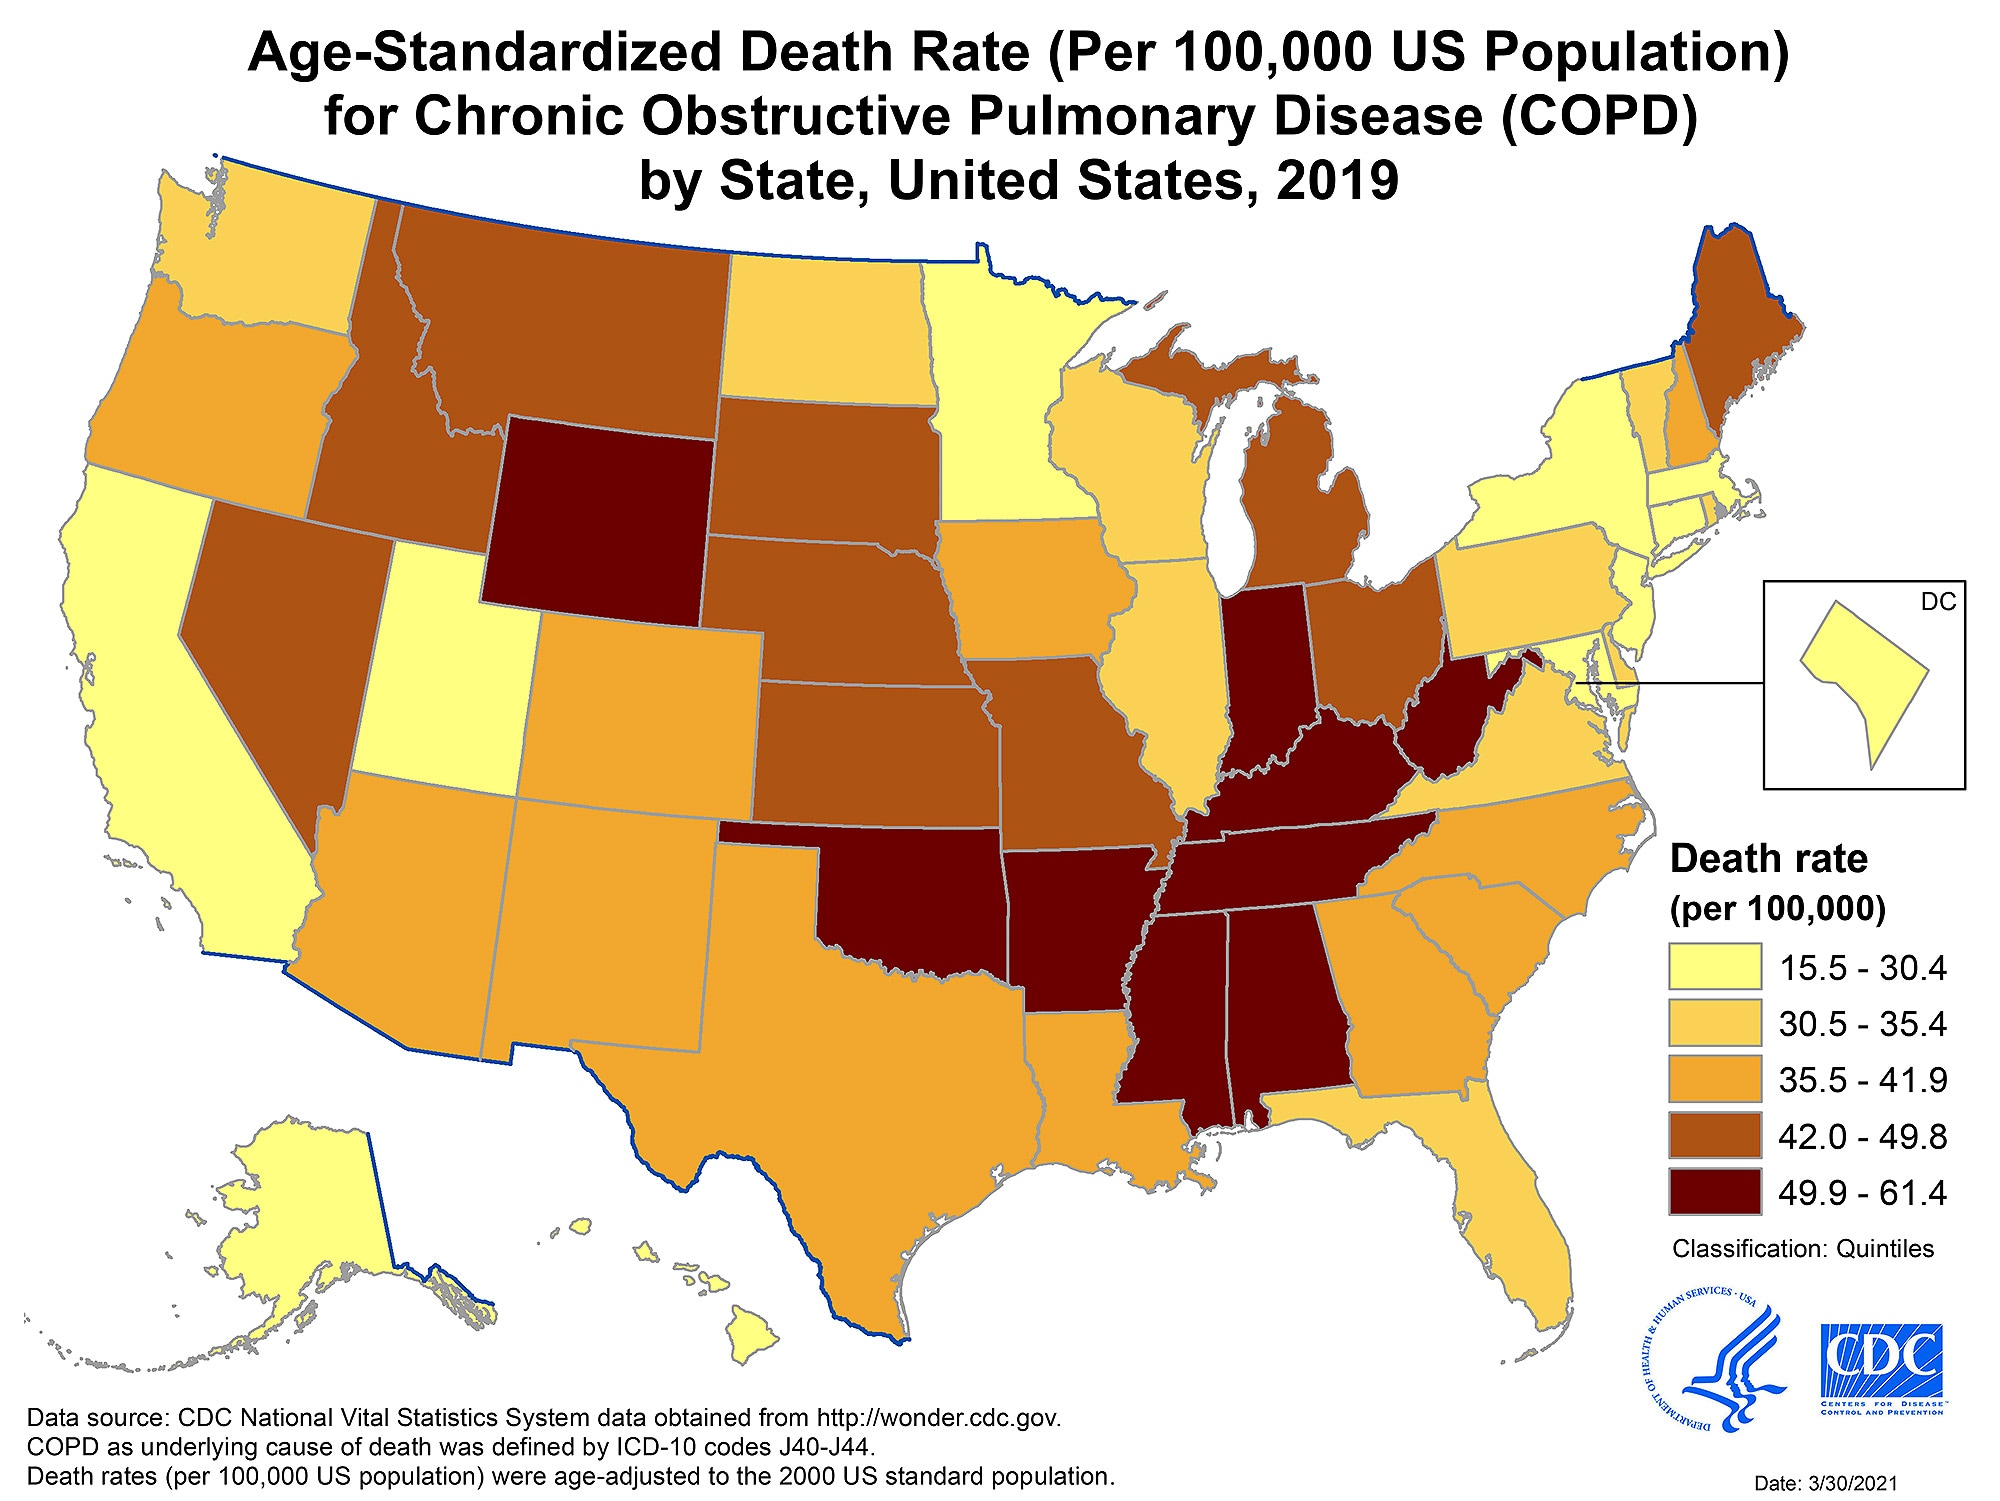 Age-adjusted death rates varied between states in 2019, ranging from 15.5 per 100,000 in Hawaii to 61.4 in Kentucky.